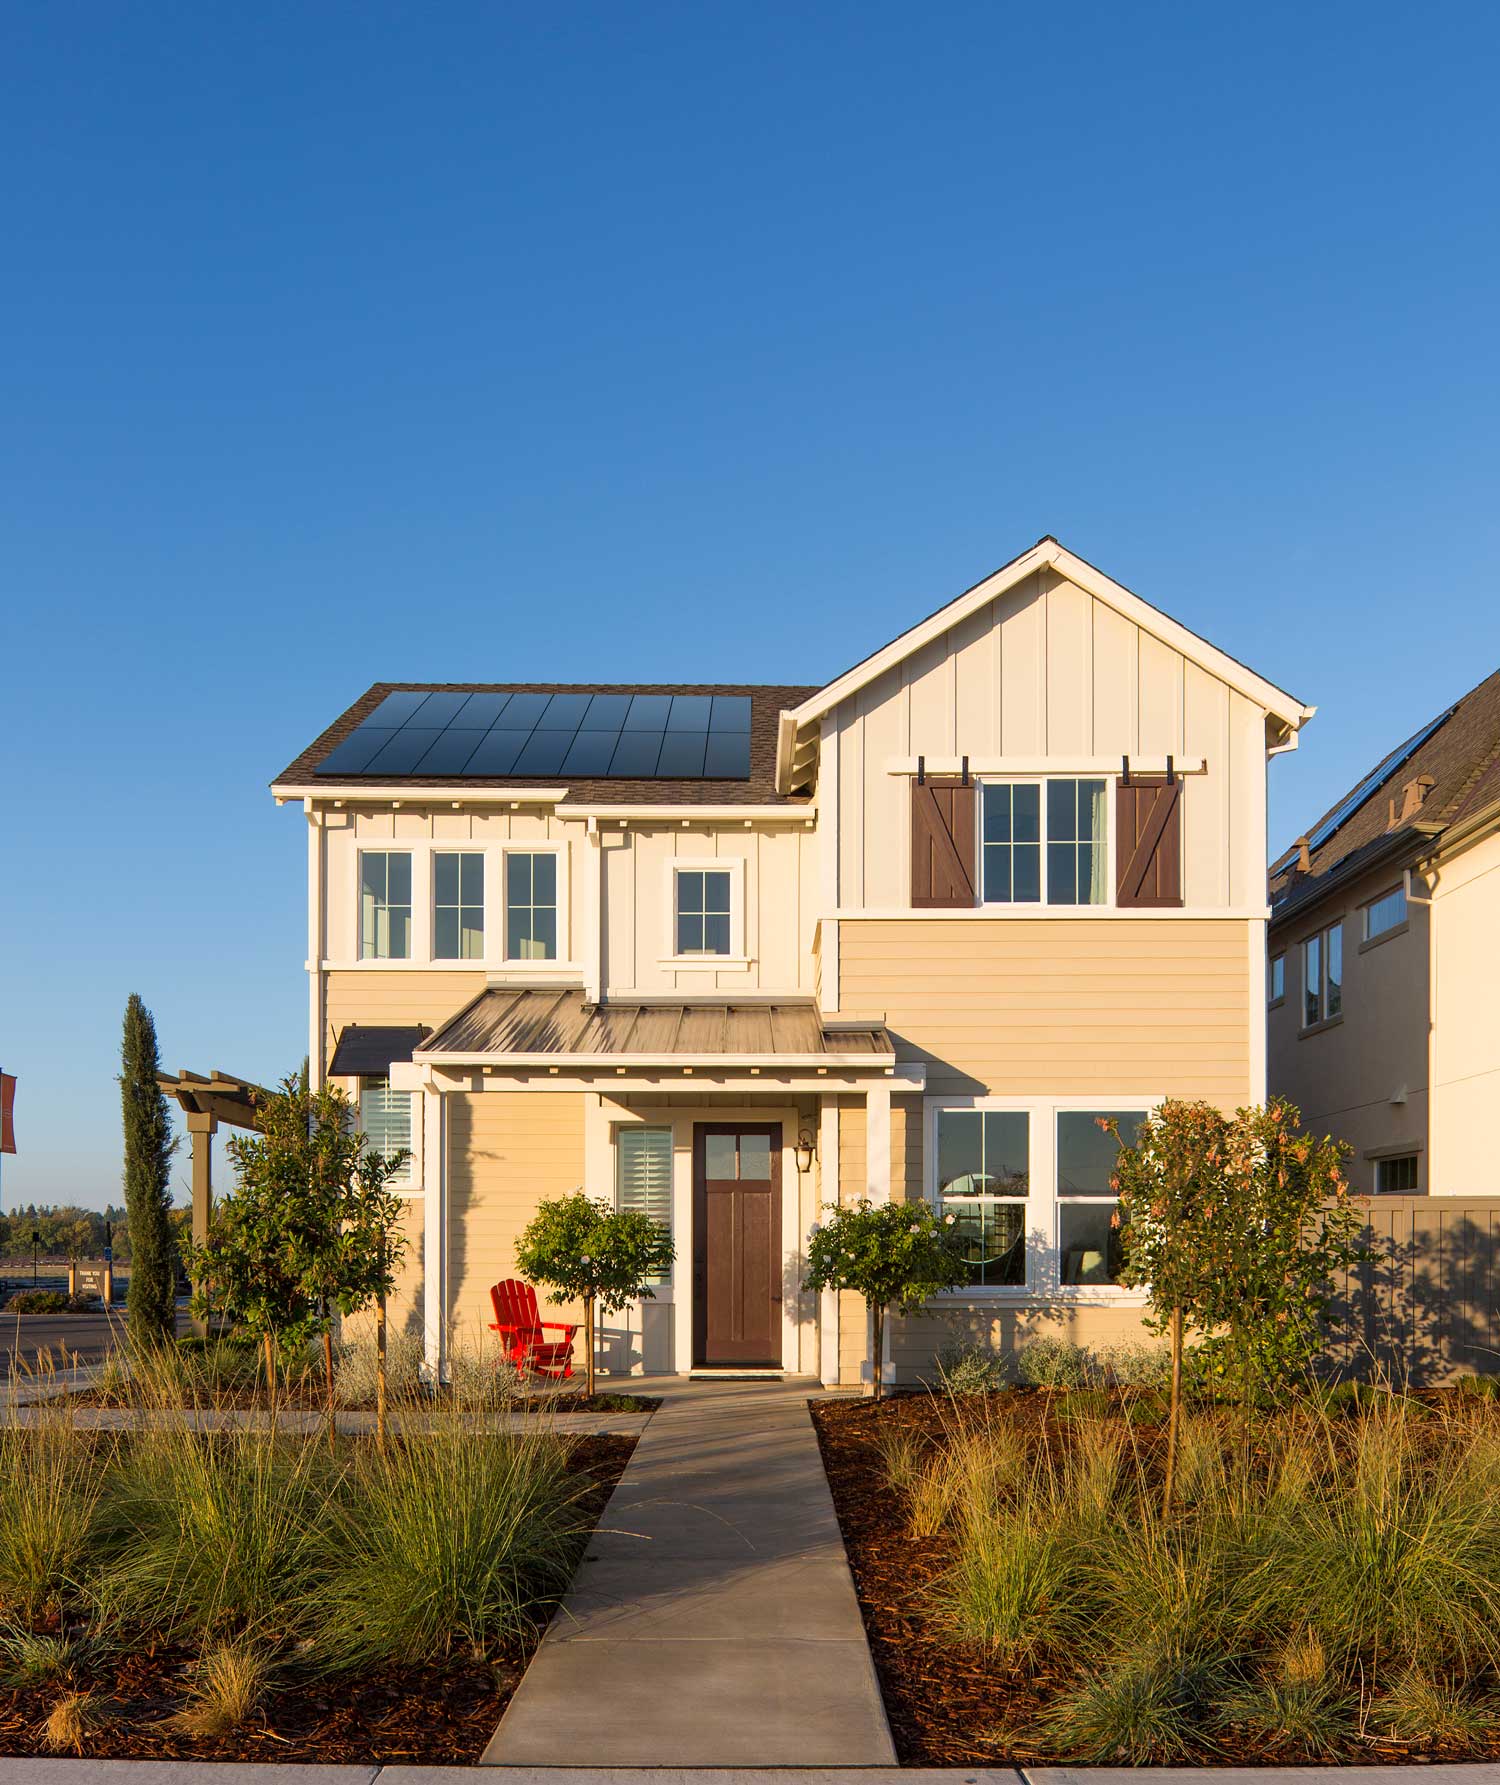 This lovely home is powered by an all-in-one solar system from SunPower by Custom Energy.